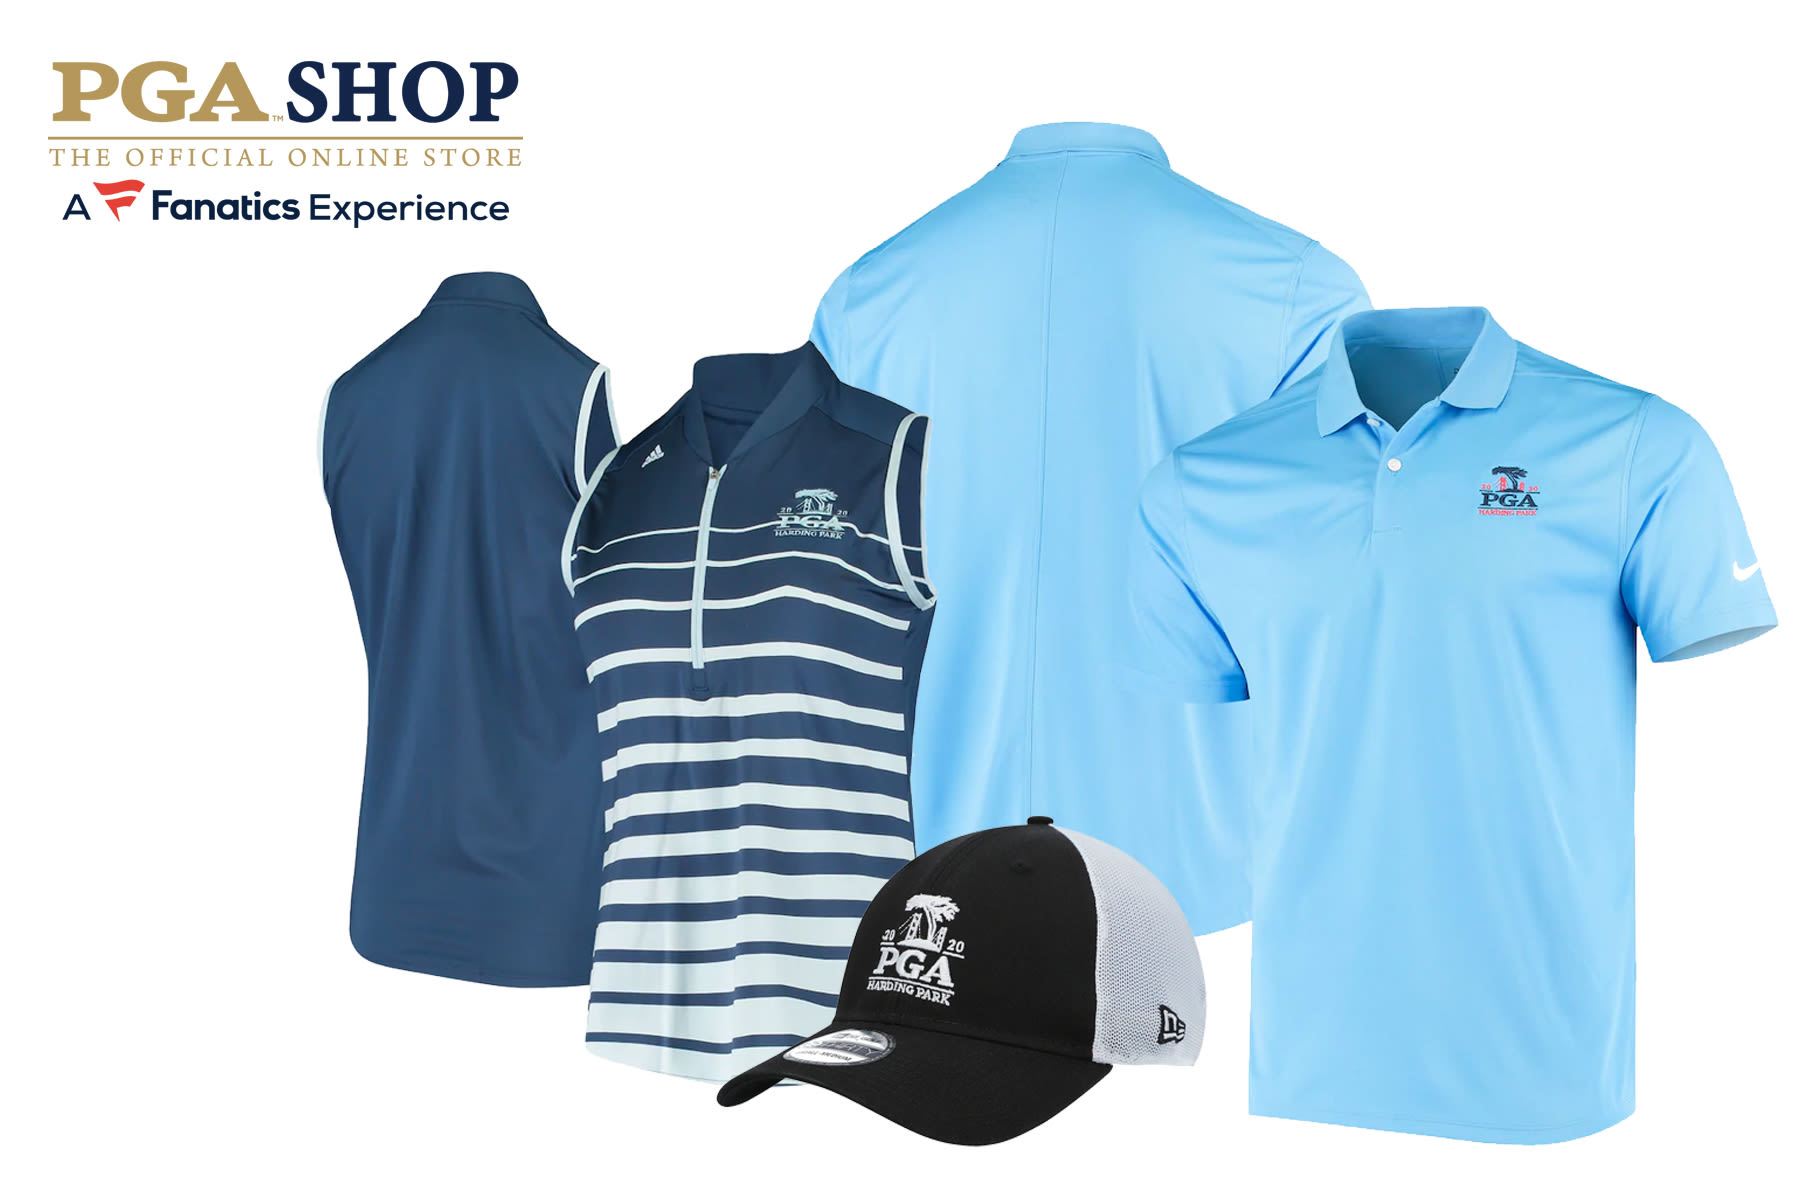 Gear Up and Save on PGA Championship Apparel from the PGA Shop